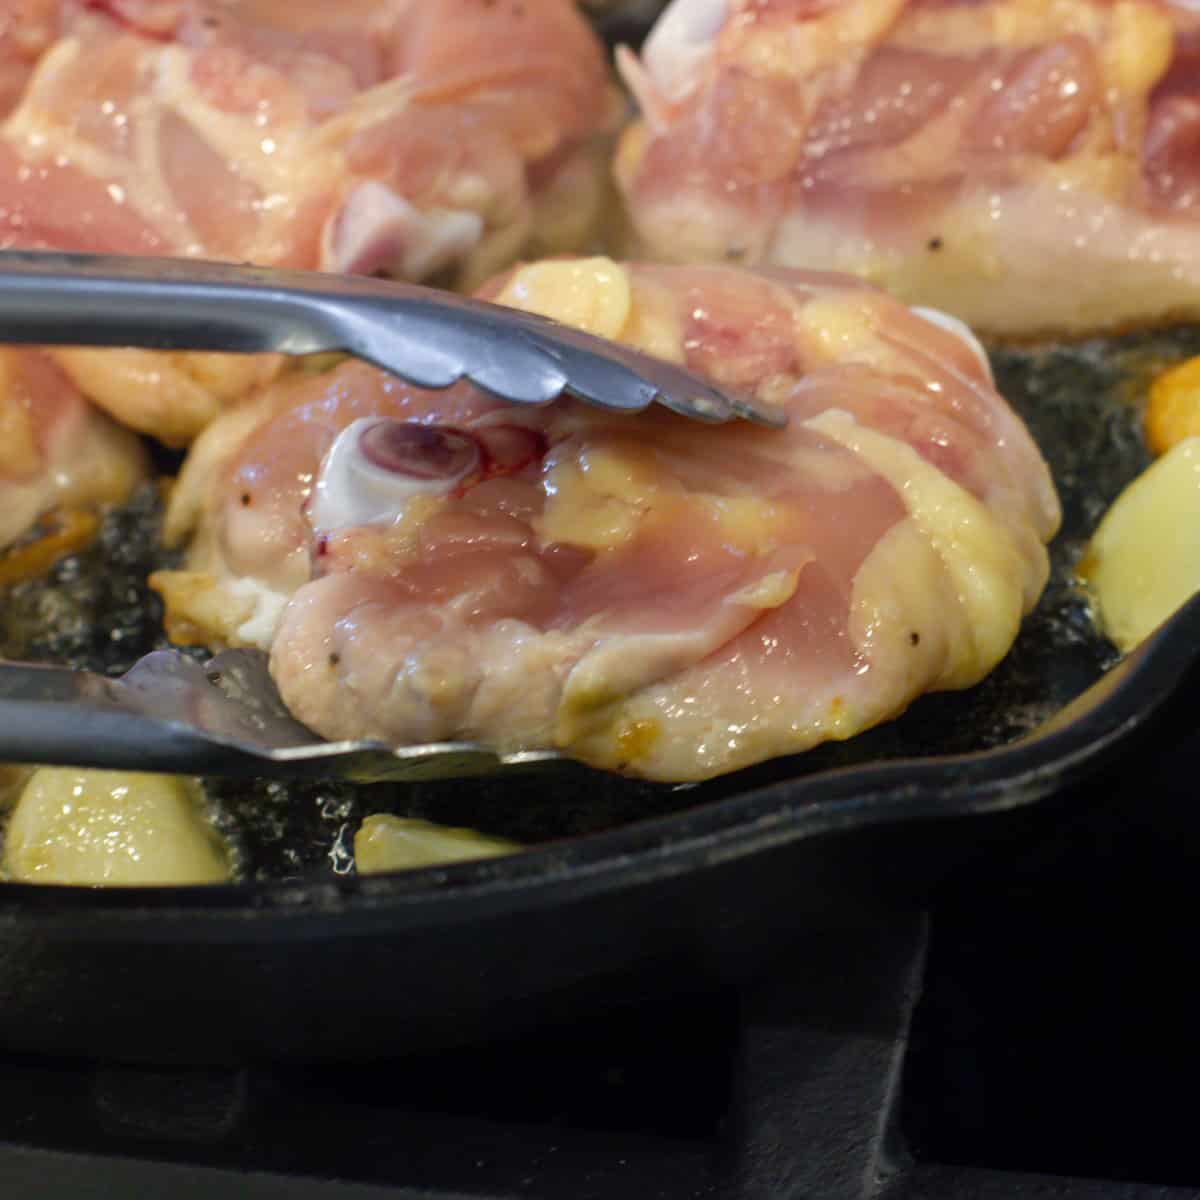 A pair of tongs flipping over a piece of chicken in a frying pan.